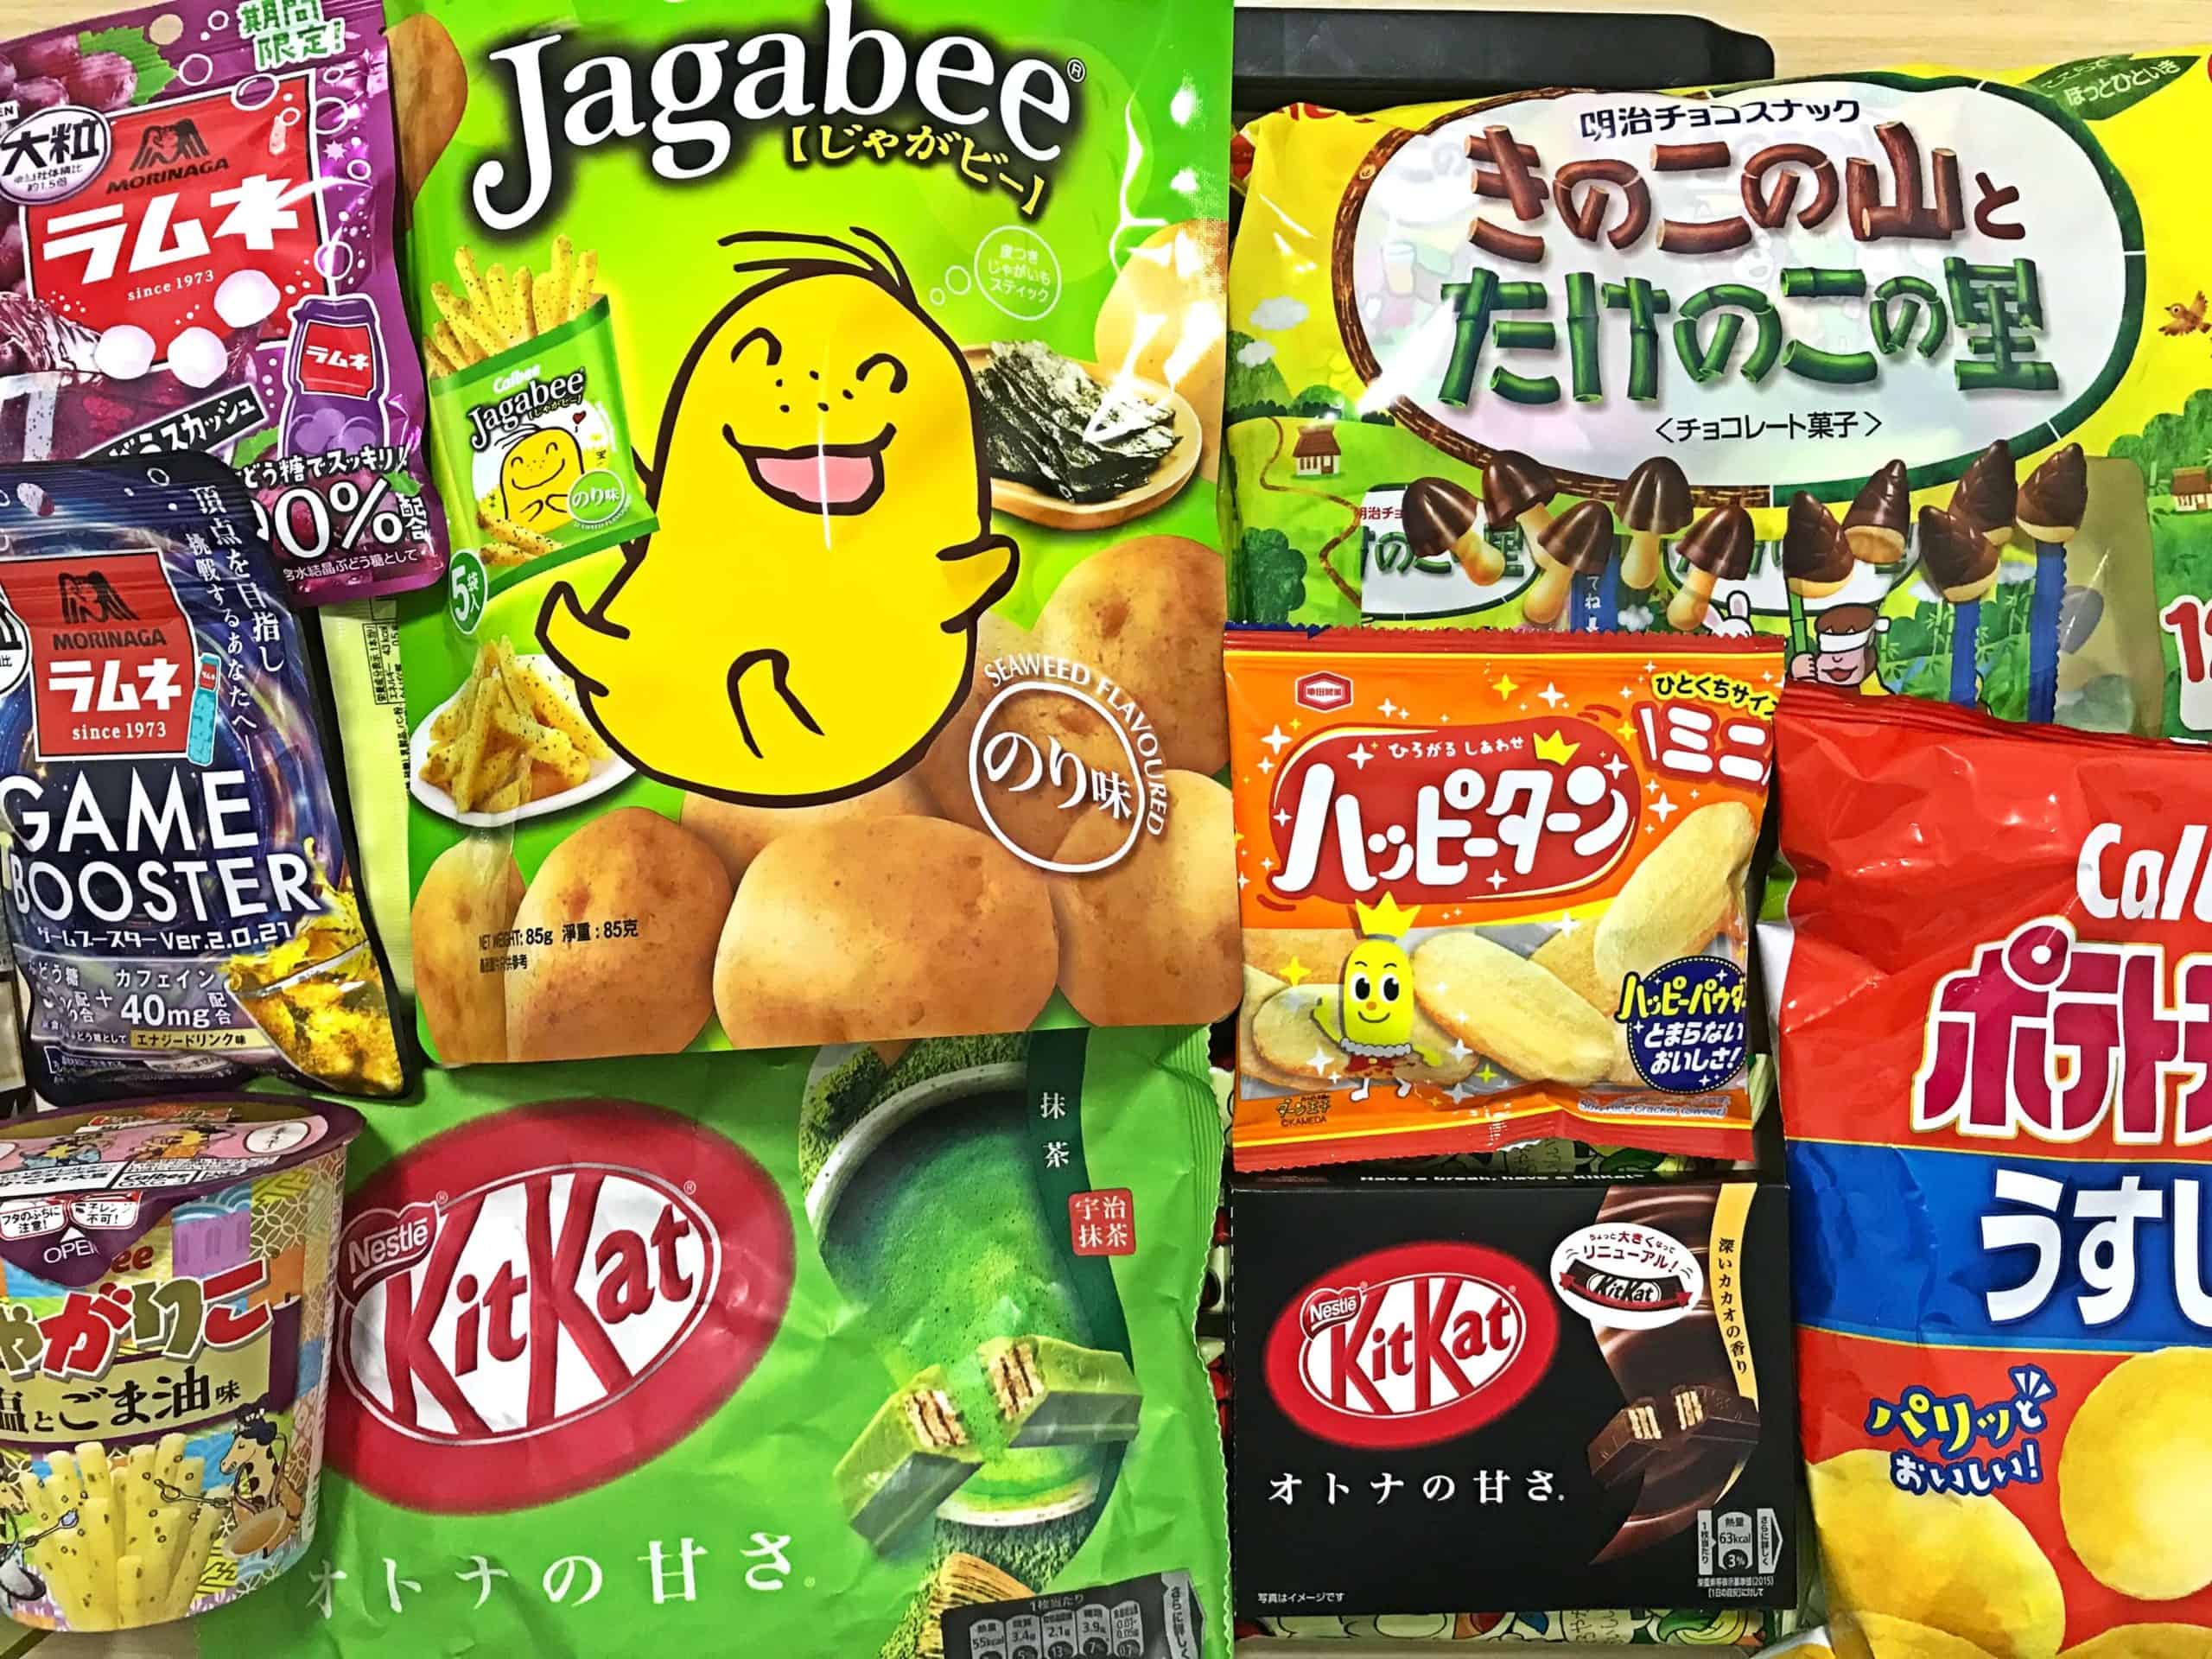 Top 23 Snacks In Japan To Try (And Where To Get Them) - Sam Lee Travel